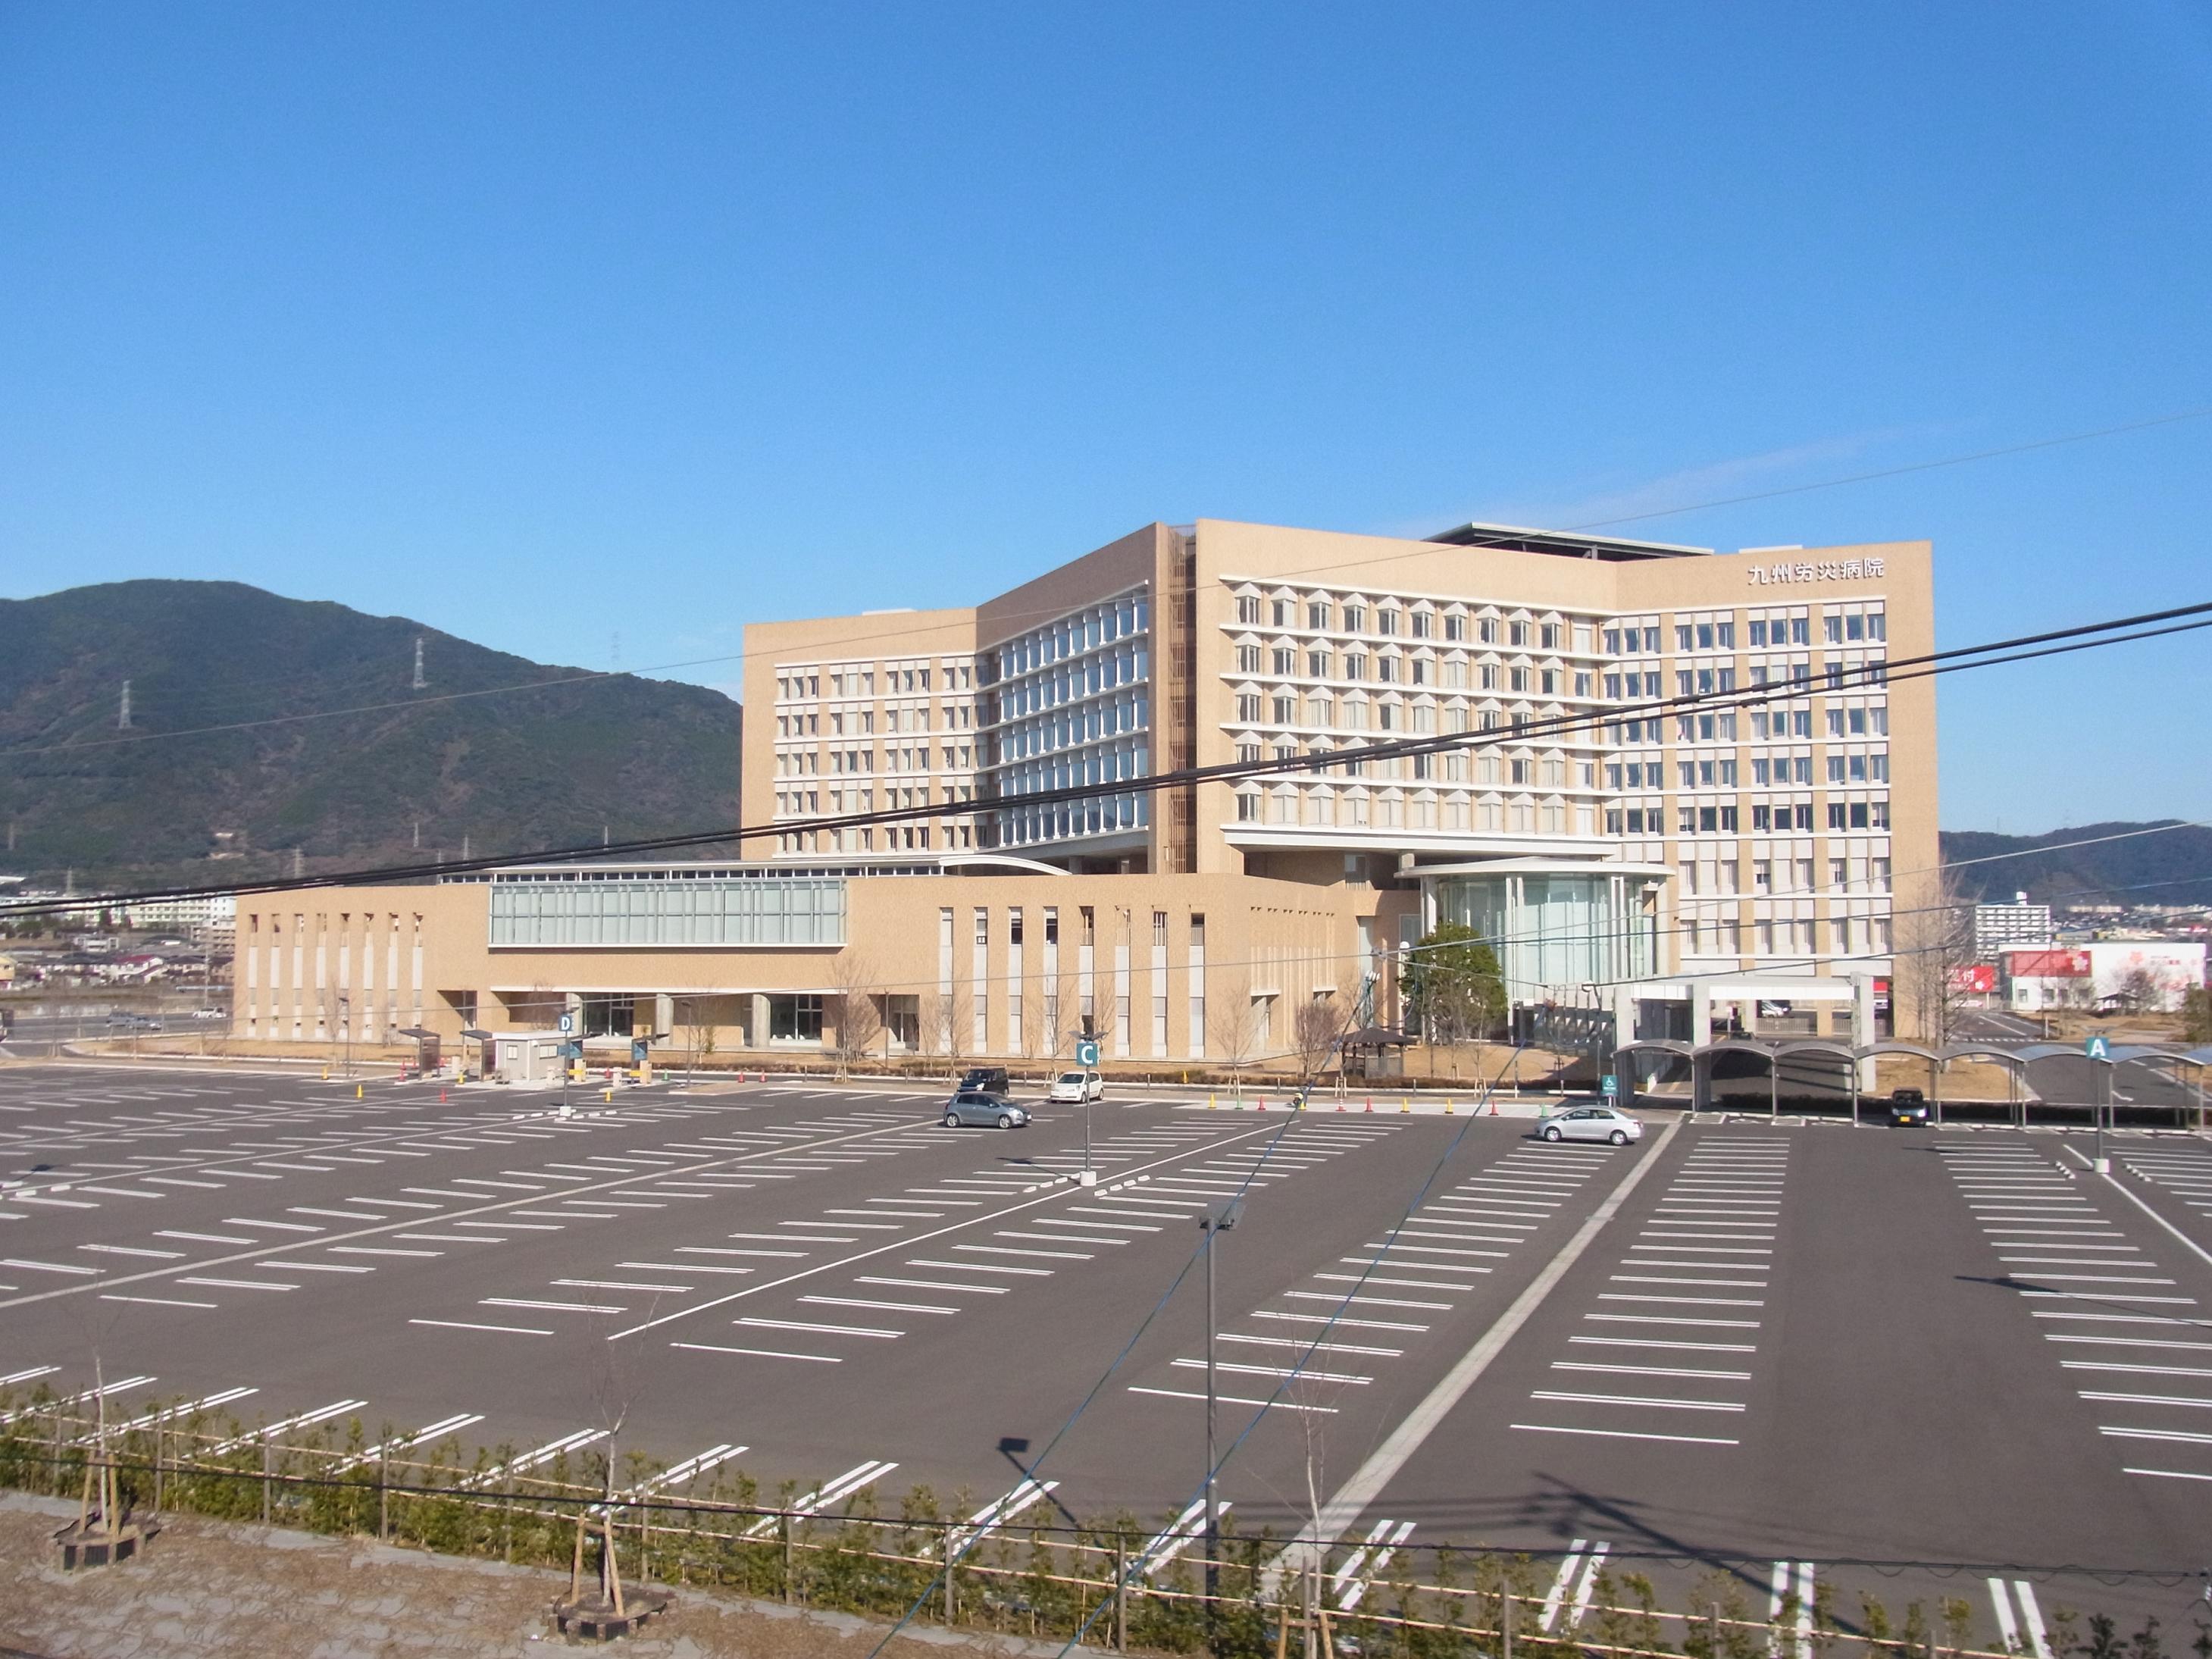 Hospital. 1307m to the National Institute of Labor Health and Welfare Organization Kyushurosaibyoin (hospital)